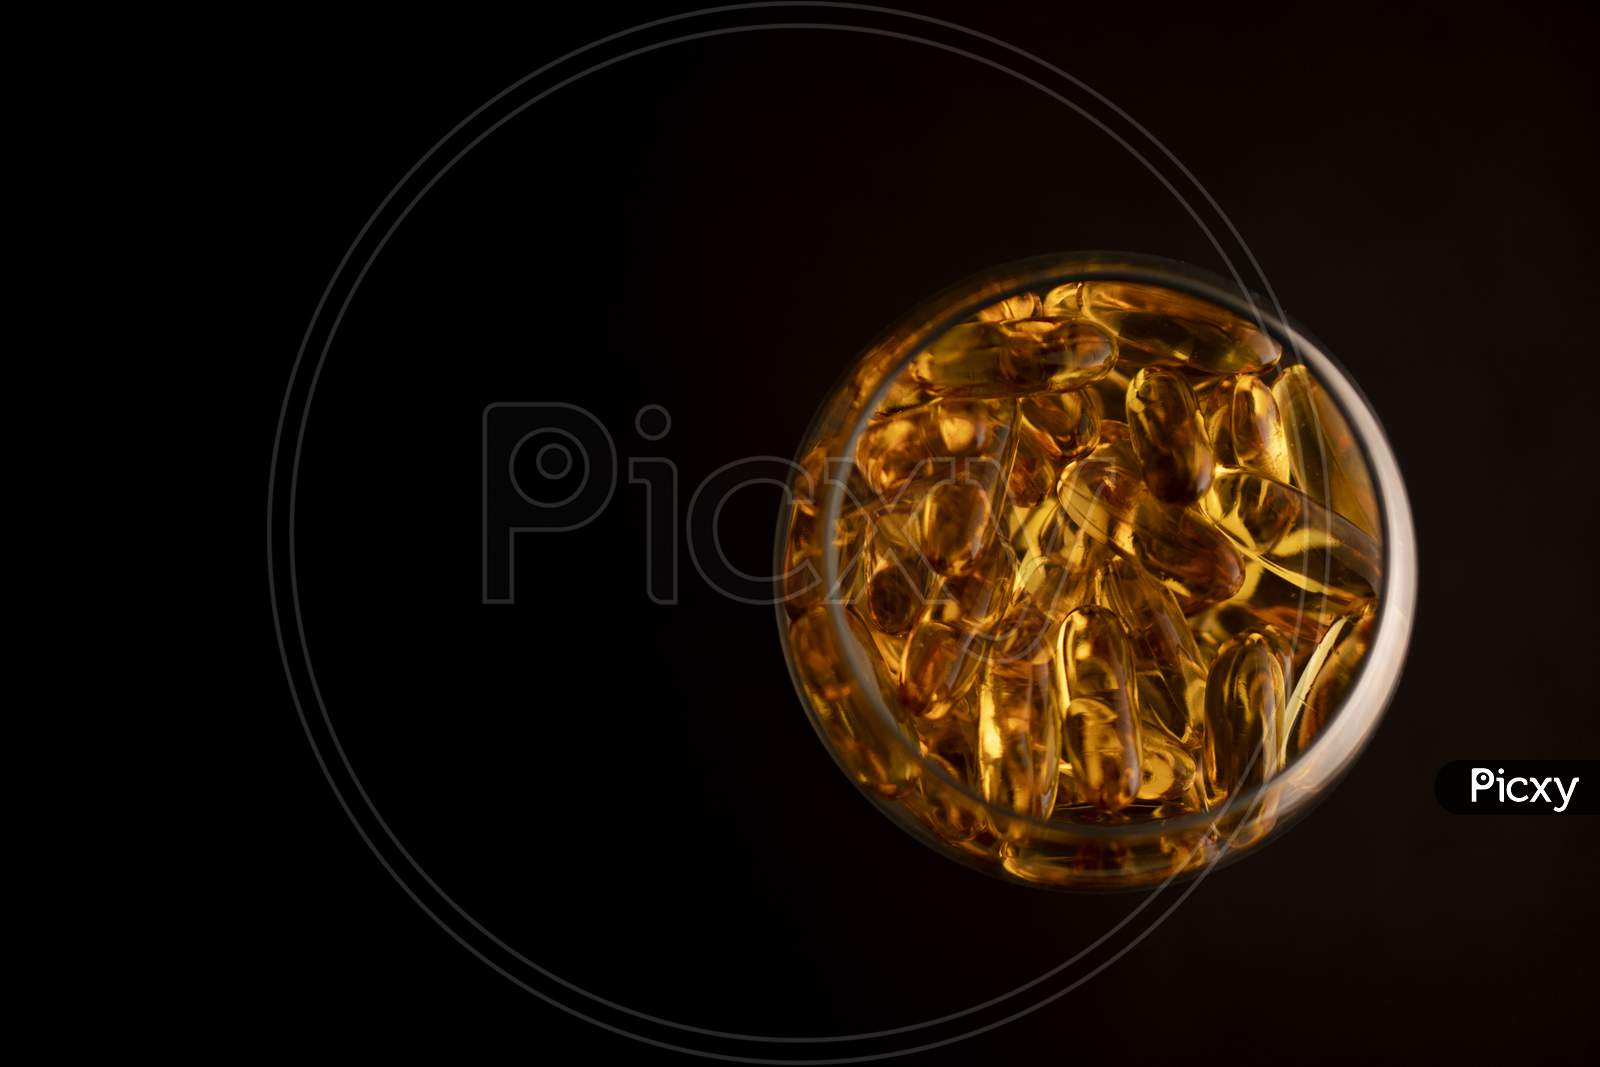 Omega-3 capsules in a glass on a black background.